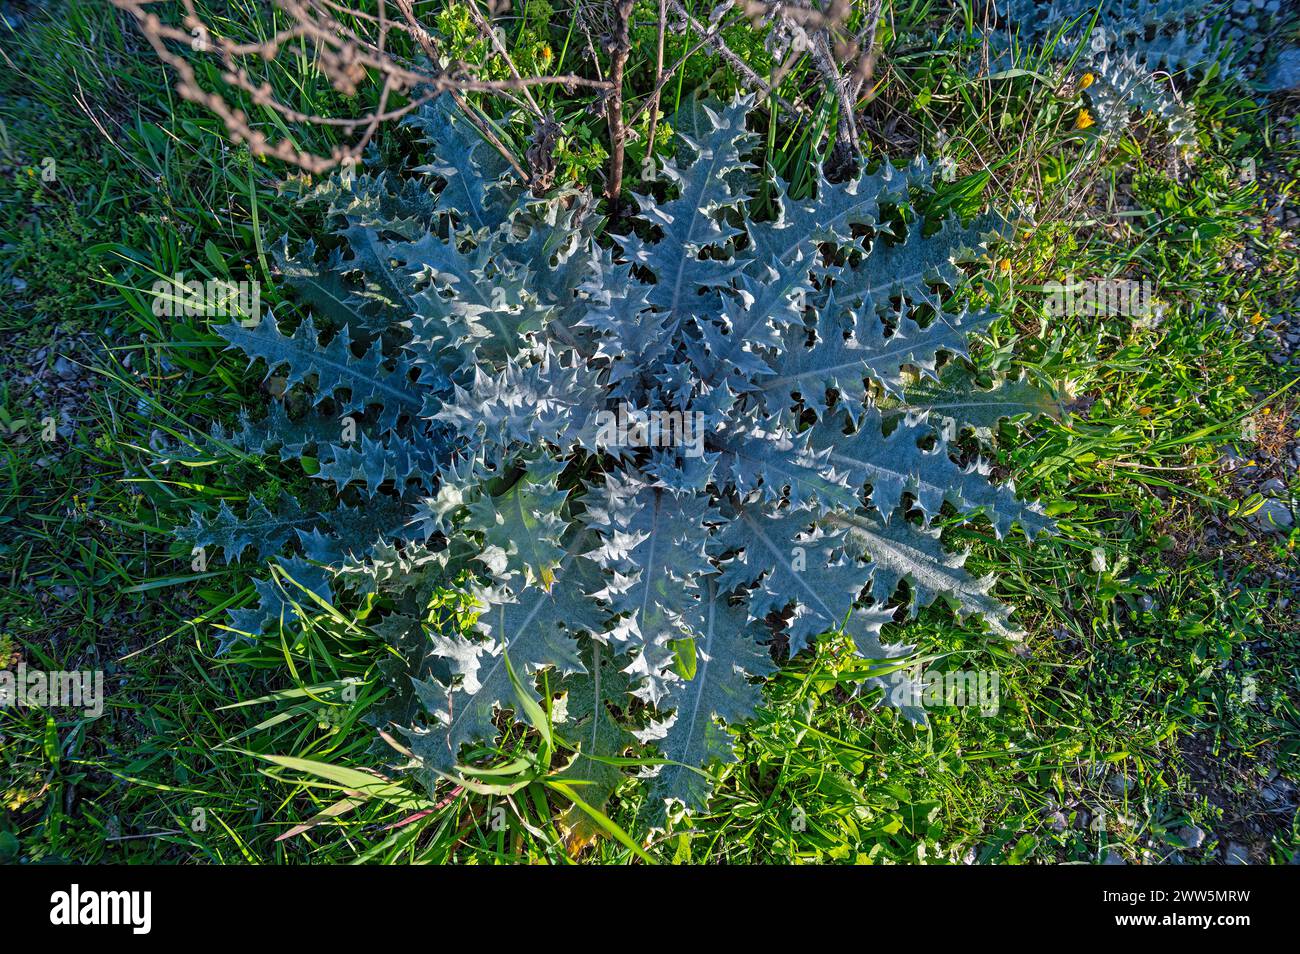 Musk thistle, Carduus nutans, growing in the green grass in spring. Stock Photo